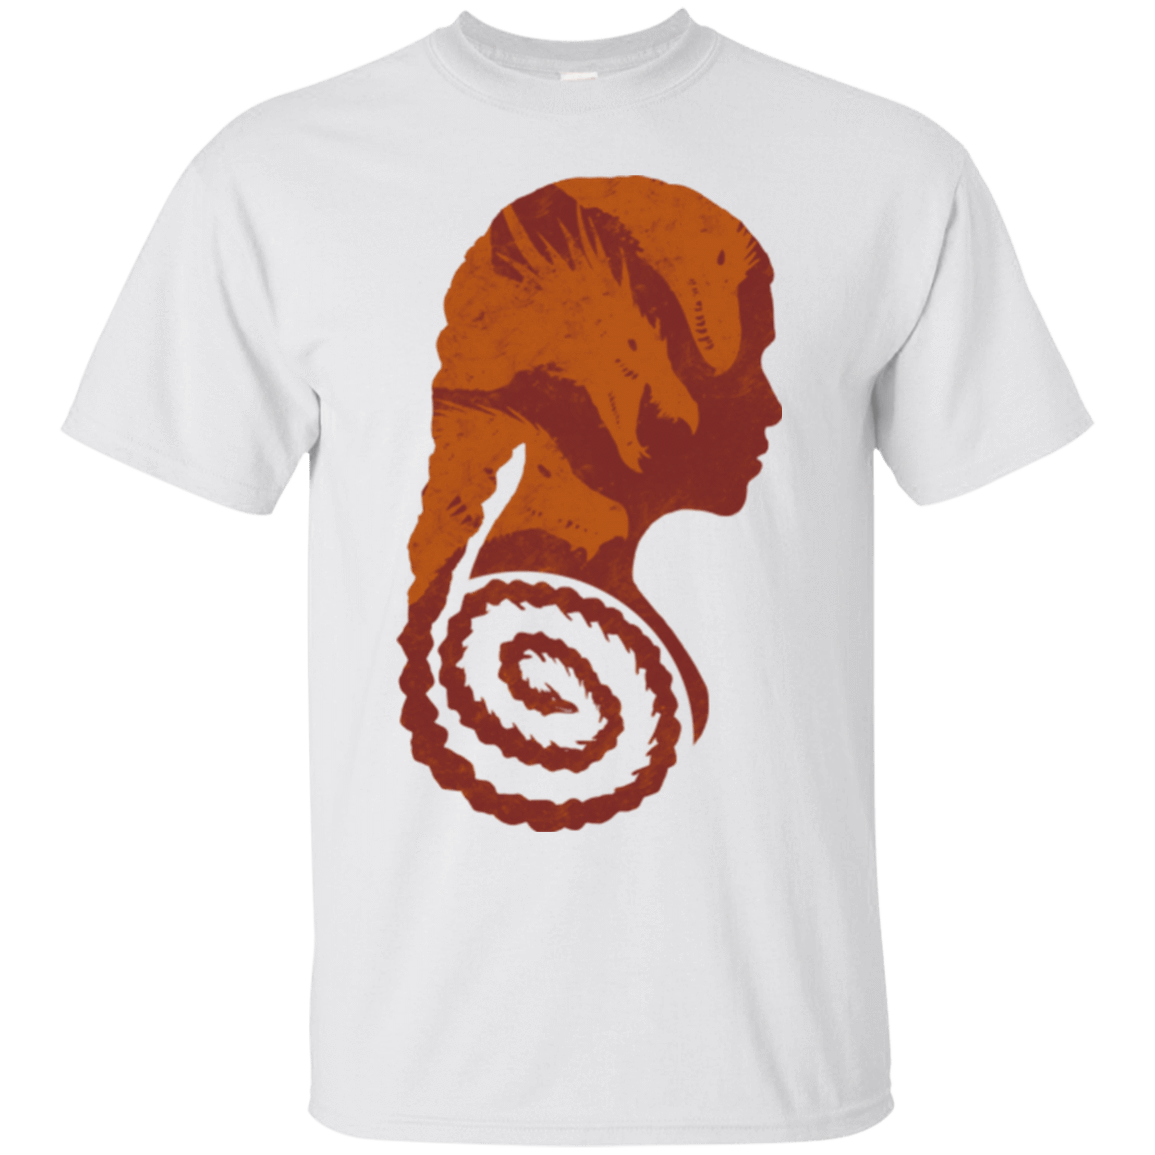 T-Shirts White / Small Mother of Dragons T-Shirt